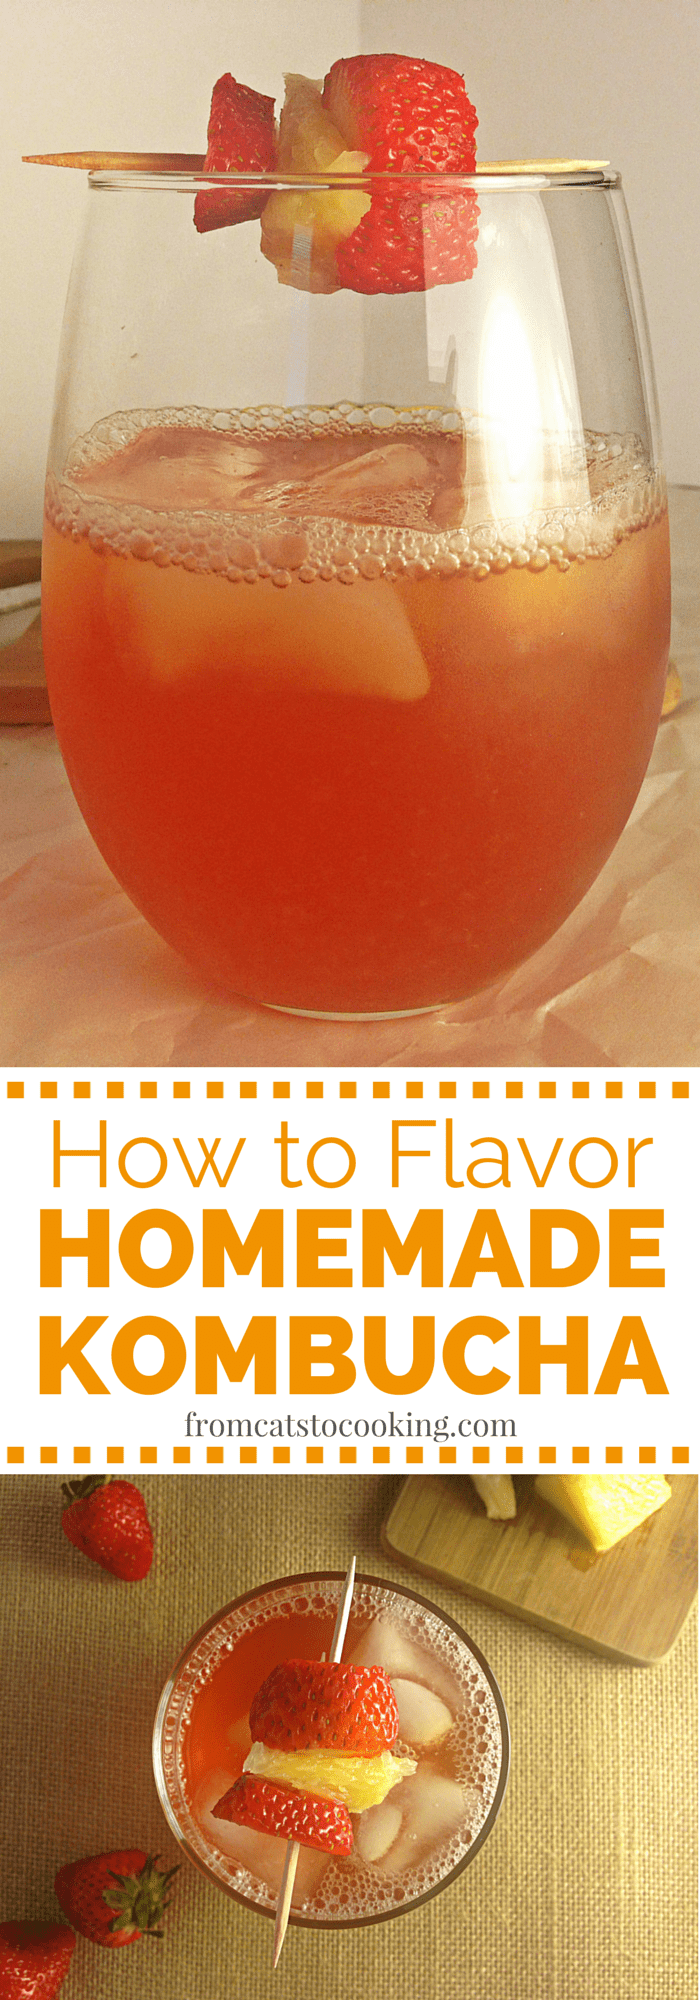 How to Flavor Homemade Kombucha with Fruit - Mango Ginger and Strawberry Pineapple | fromcatstocooking.com